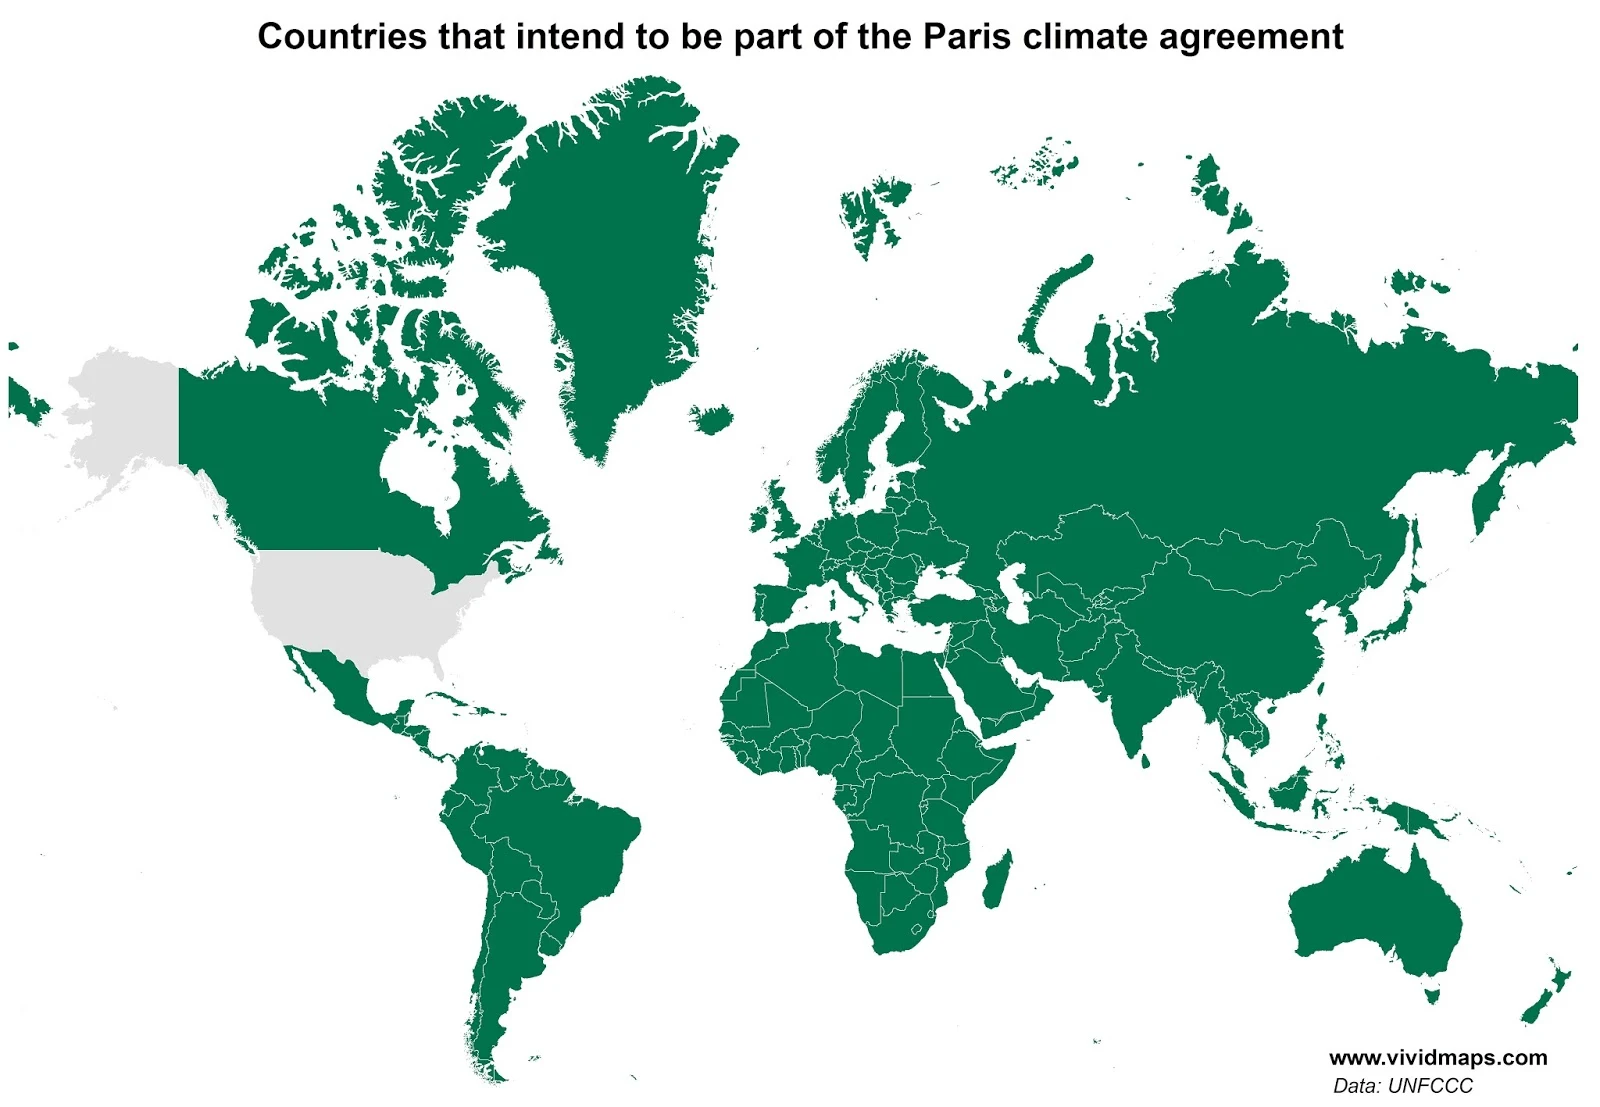 All countries have signed Paris agreement except the USA